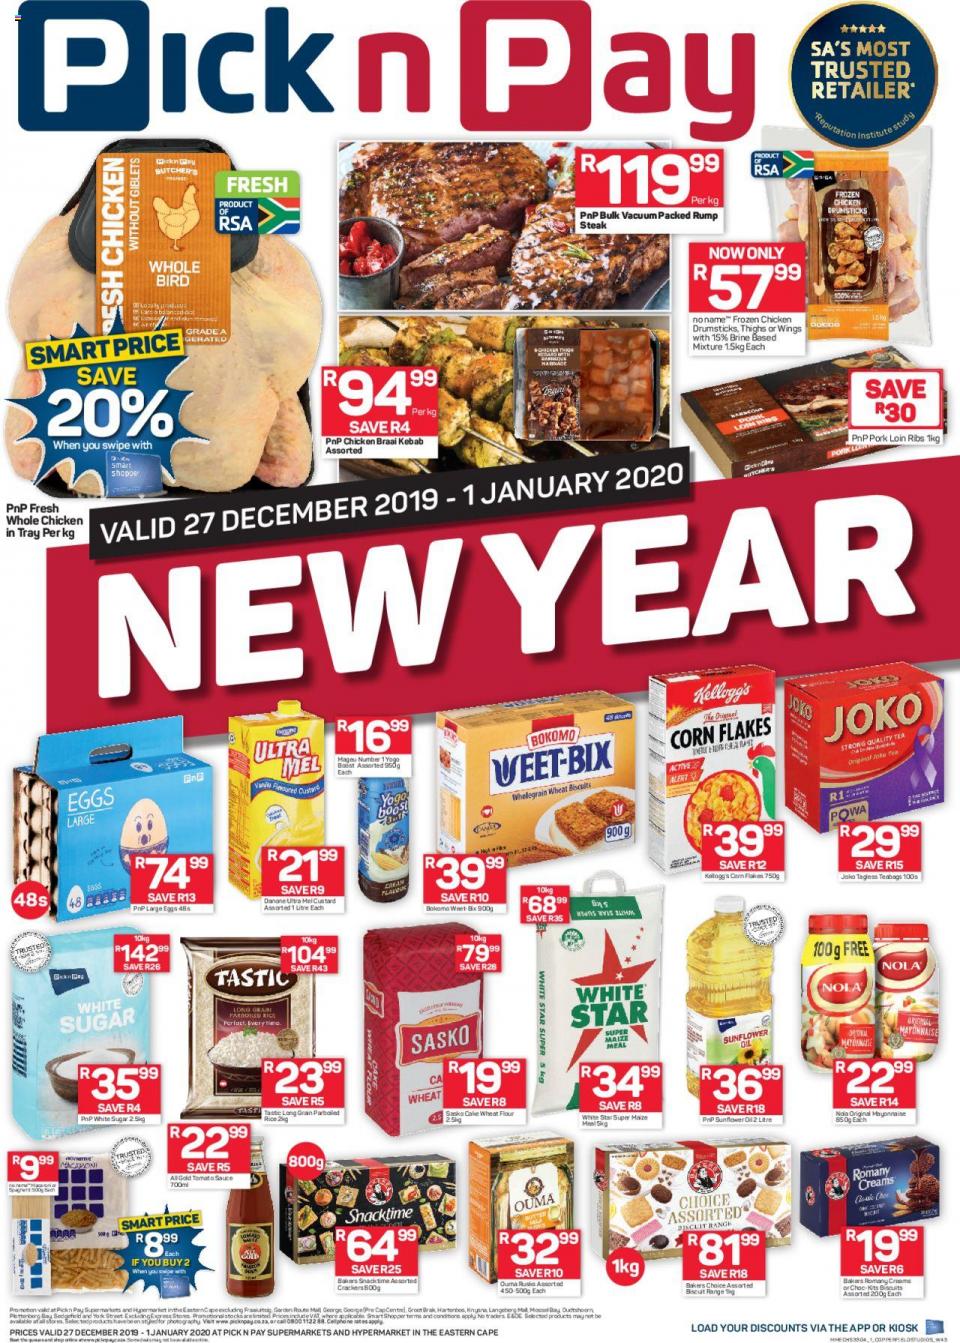 Pick n Pay Specials New Year Sale 27 December 2019